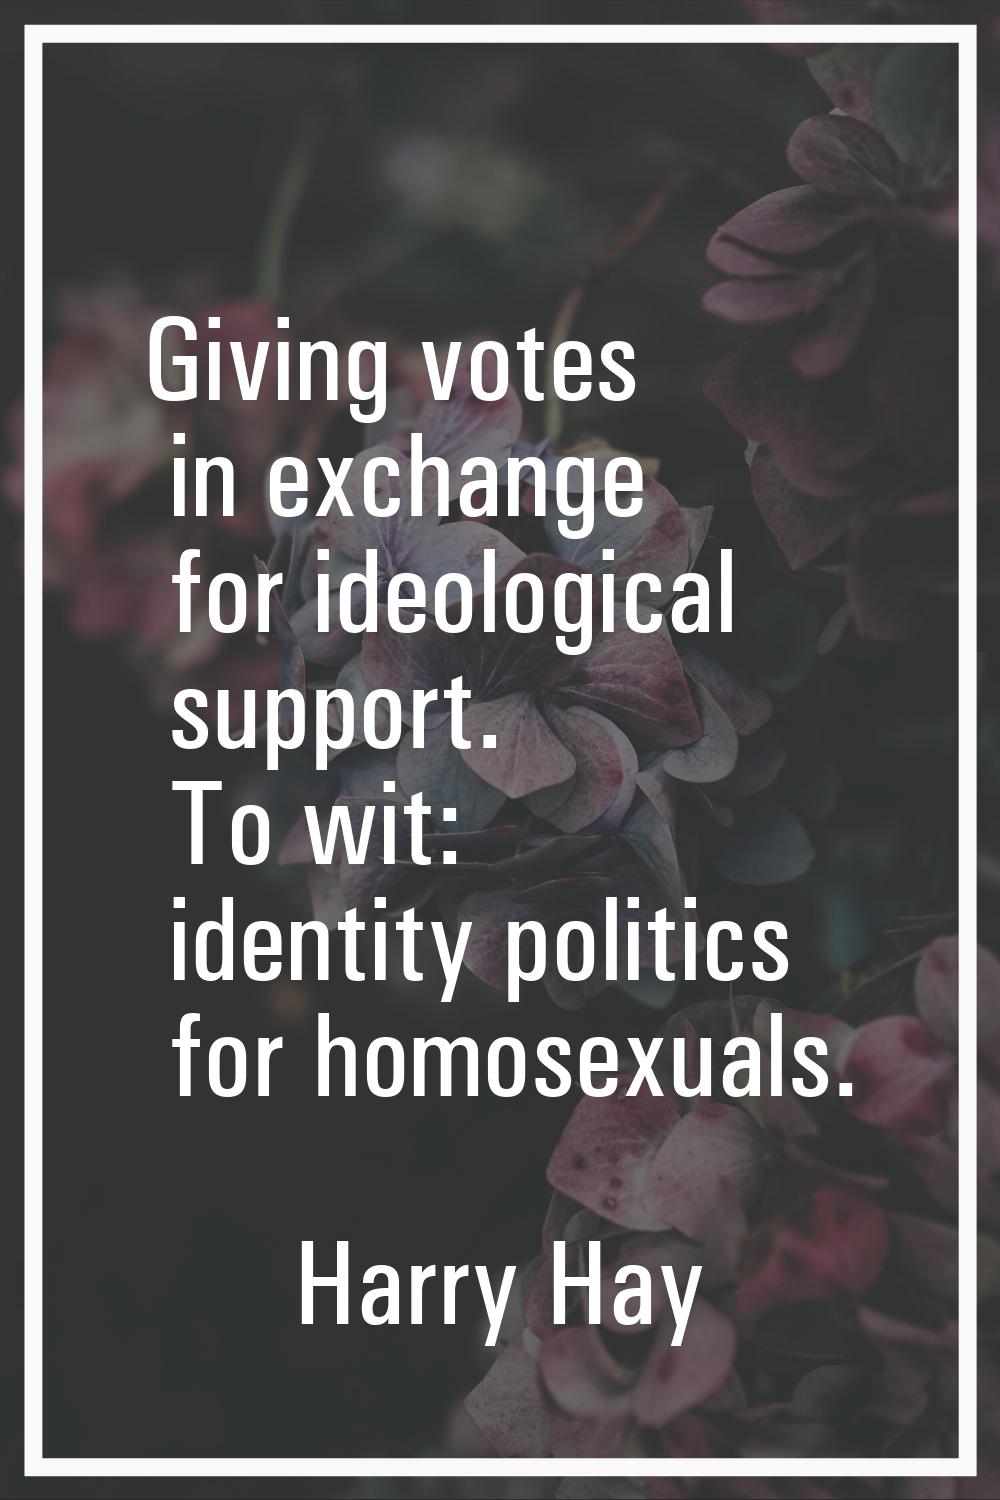 Giving votes in exchange for ideological support. To wit: identity politics for homosexuals.